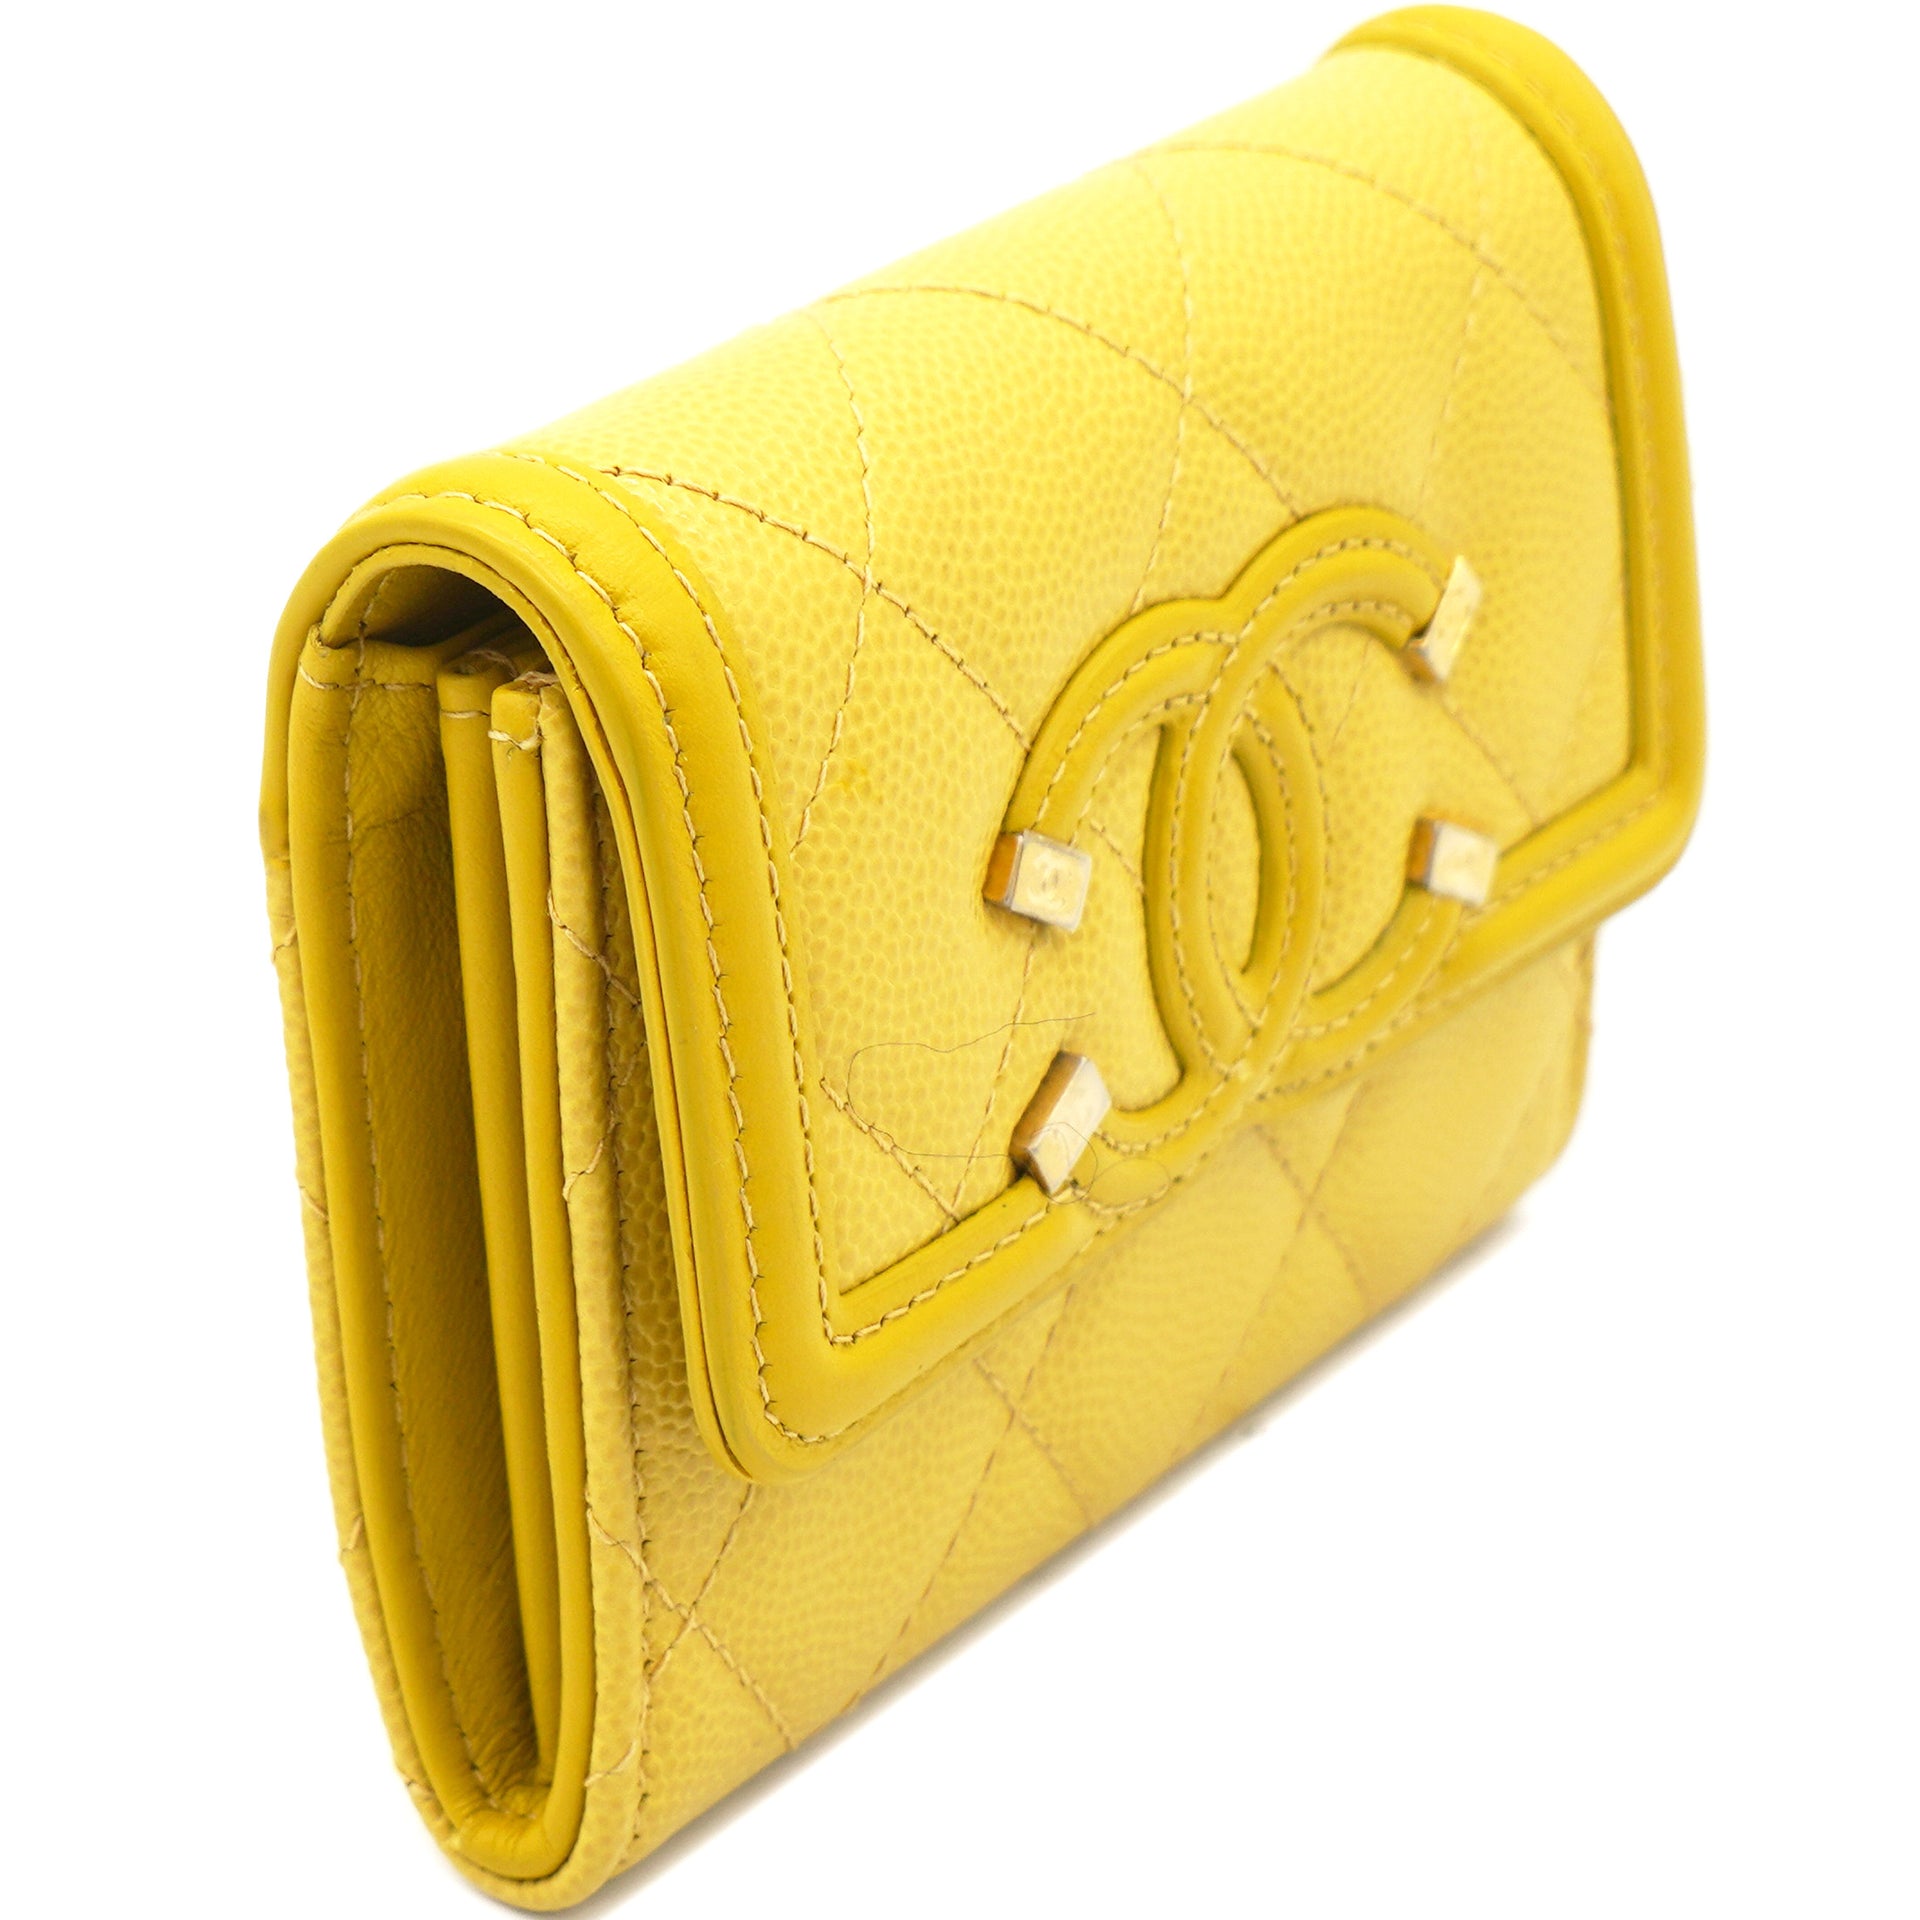 Caviar Quilted Filigree Mini Flap Wallet Yellow